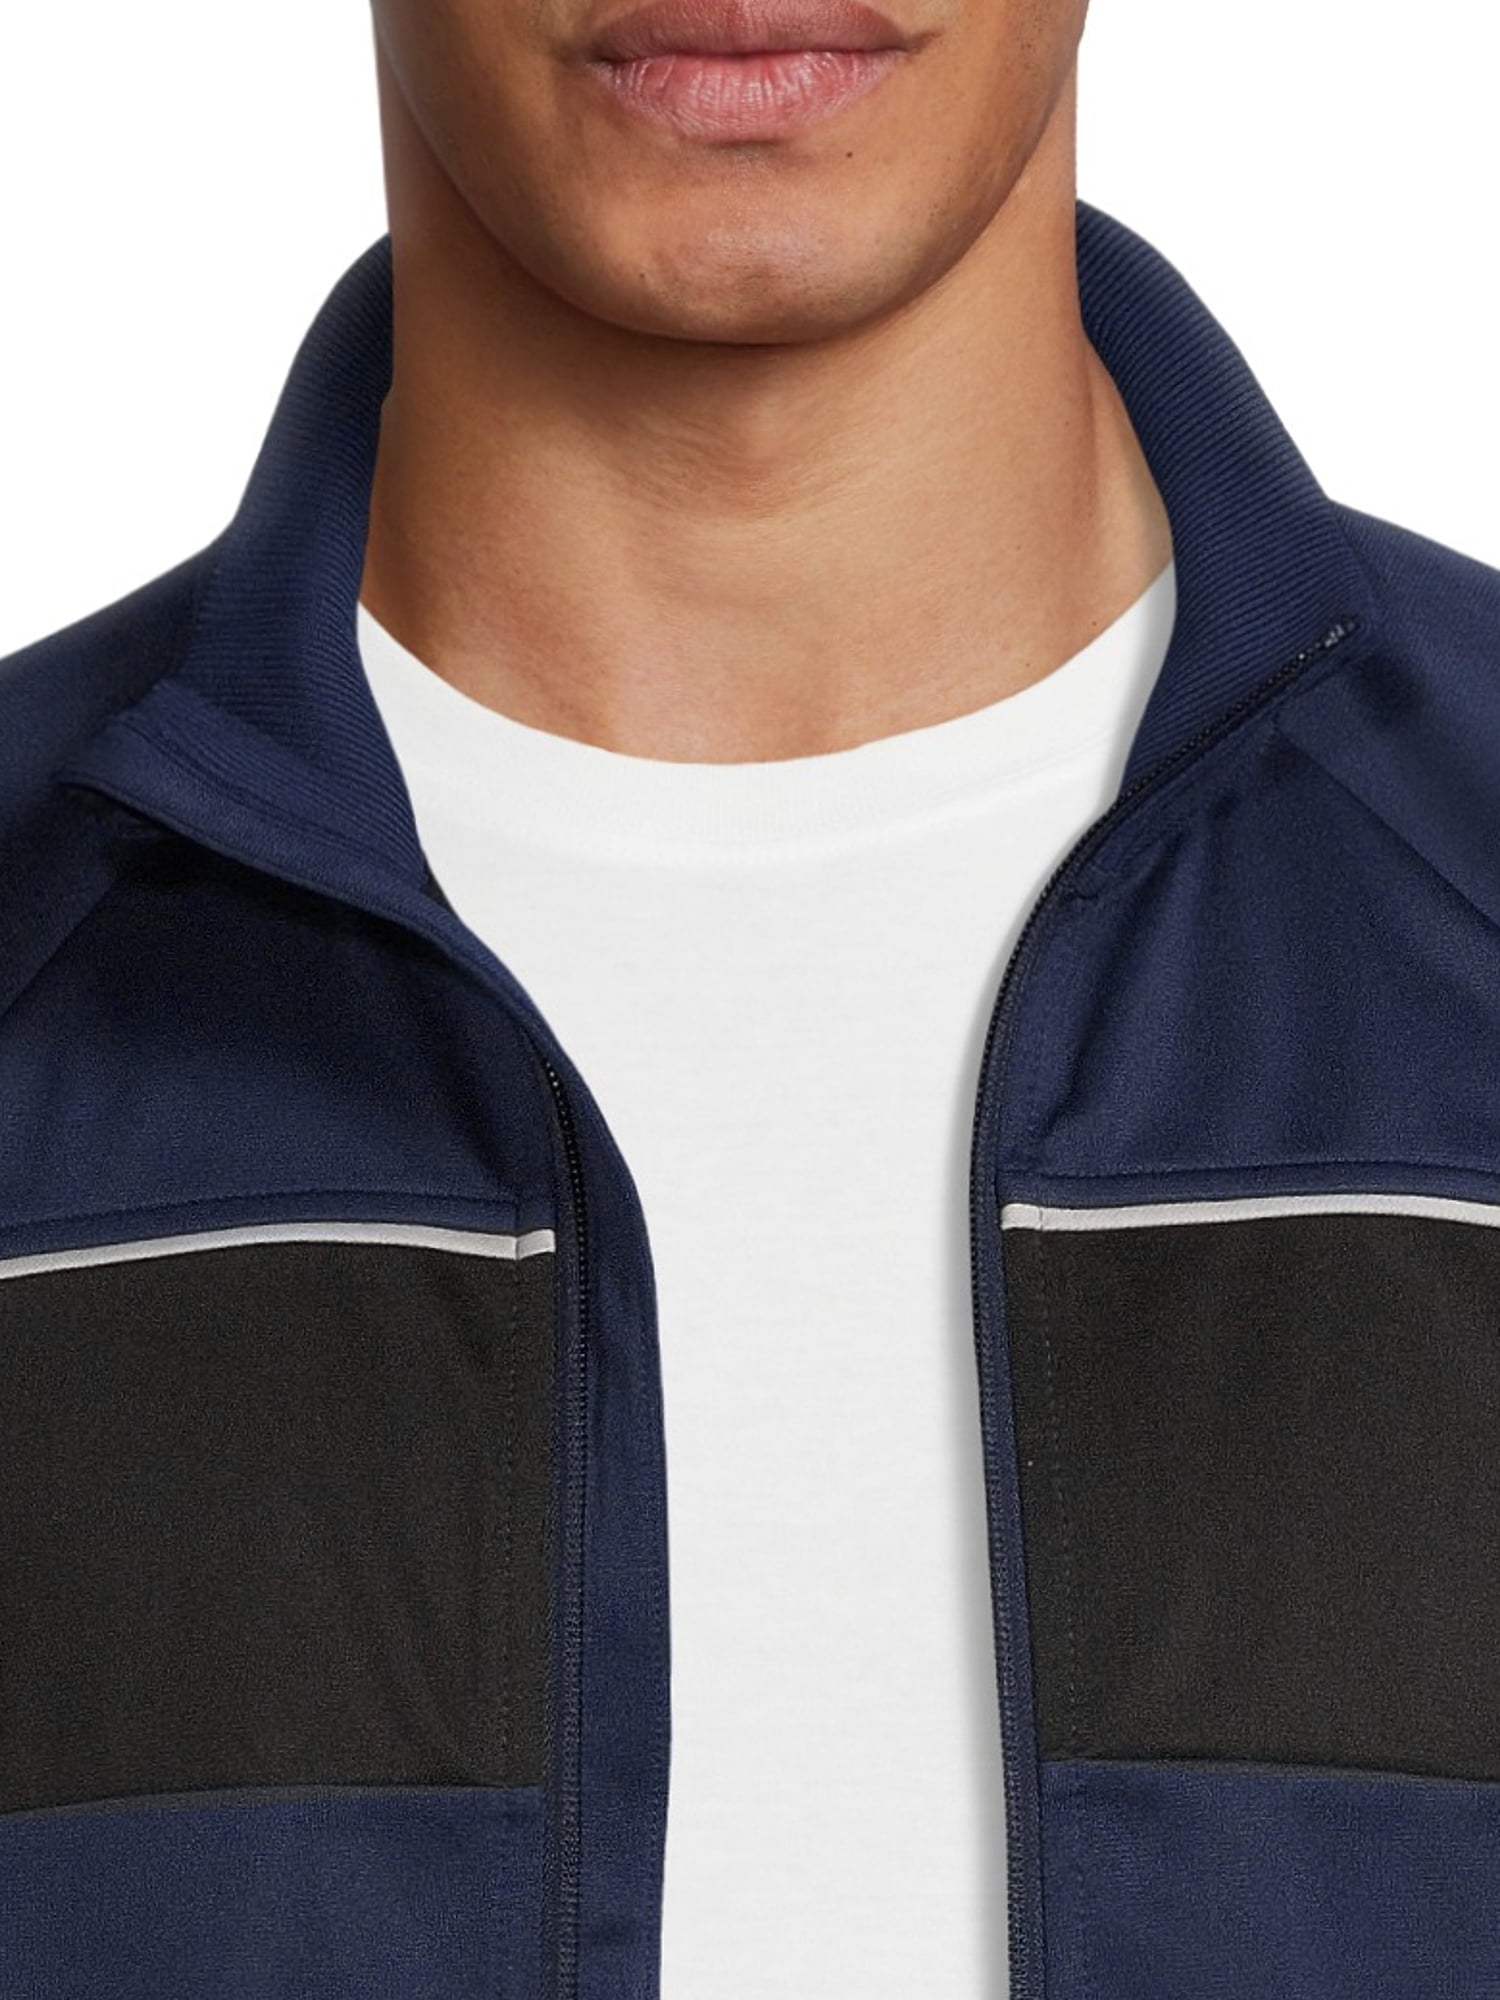 Athletic Works Men's and Big Men's Track Jacket, Sizes up to 5XL 